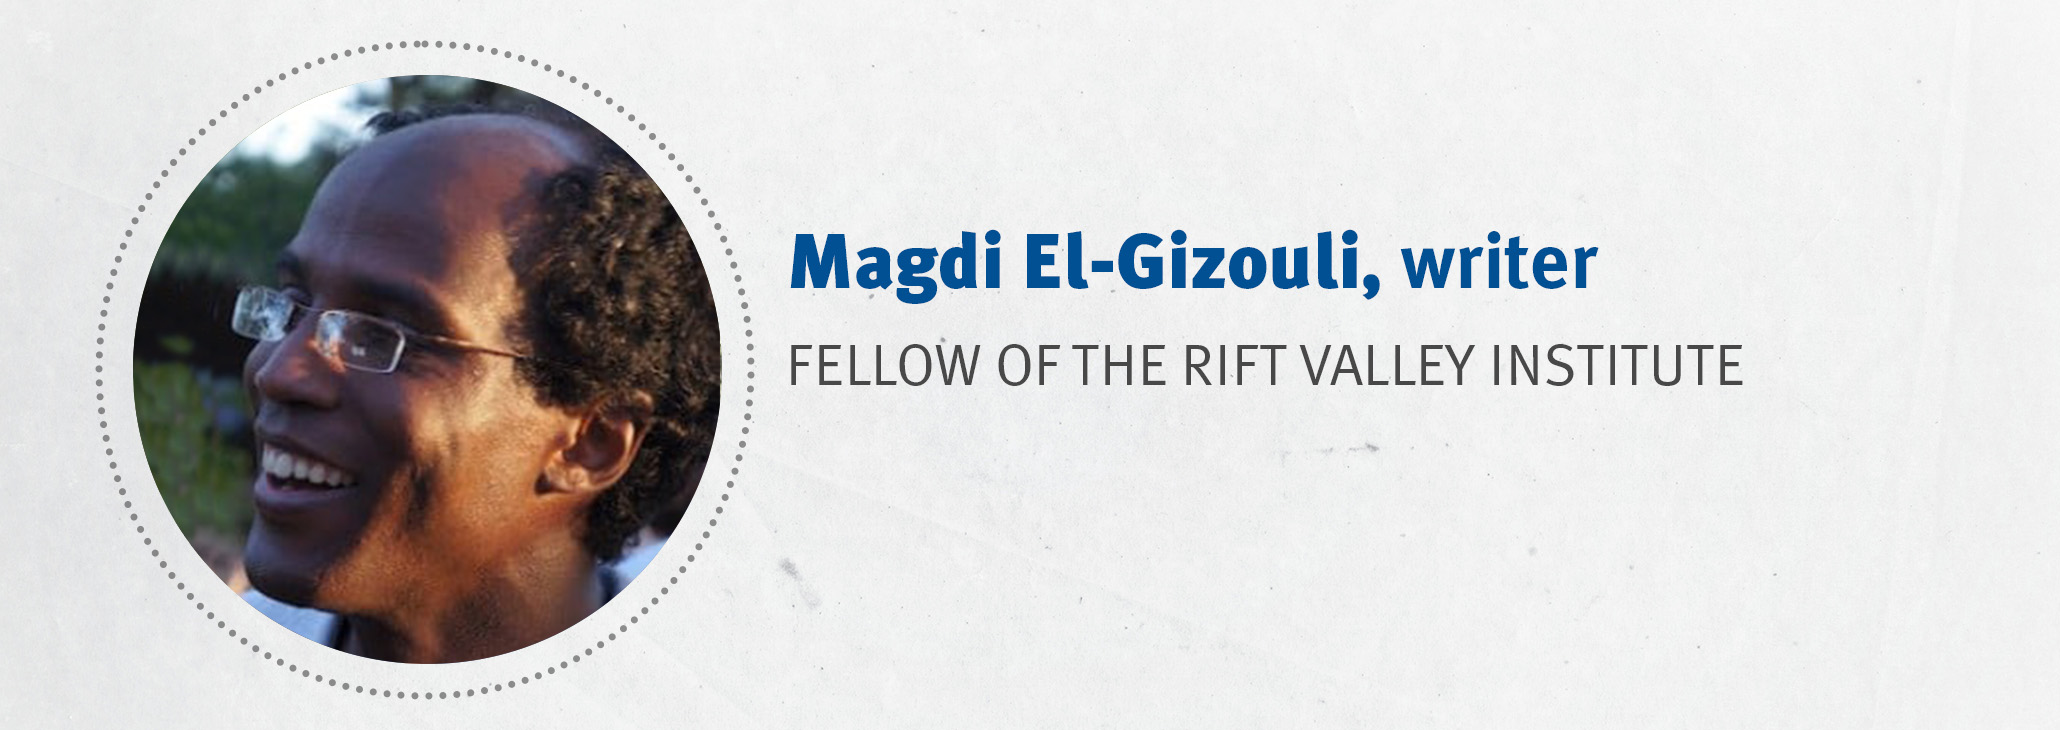 Magdi El-Gizouli, writer Fellow of the Rift Valley Institute